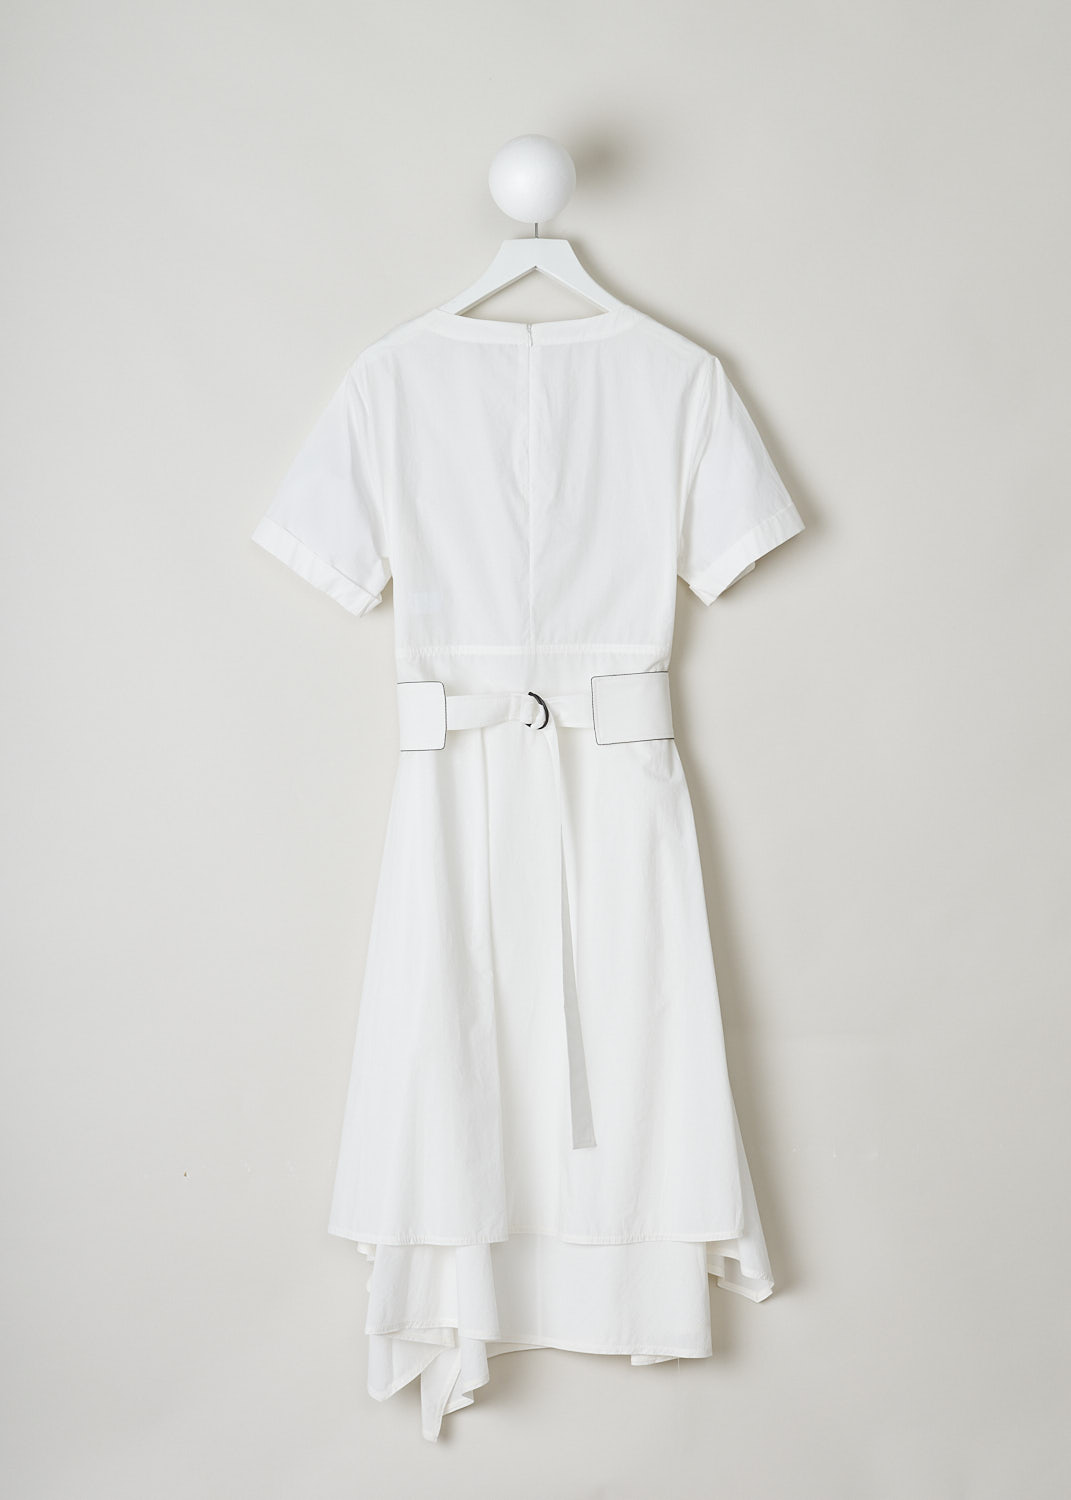 BRUNELLO CUCINELLI, WHITE MIDI DRESS WITH A HIGH-LOW SKIRT, MH127A4534_C600, White, Back, This white midi dress has a round neckline and short sleeves with folded cuffs. The dress has a flared high-low skirt, meaning the hemline is shorter at the front and longer at the back. The broad fabric belt has a contrasting black monili trim and a D-ring belt buckle. The dress comes with a detachable underskirt with a broad elasticated waistband. The underskirt is attached with two buttons. In the back, a concealed centre zip functions as the closure option. 
